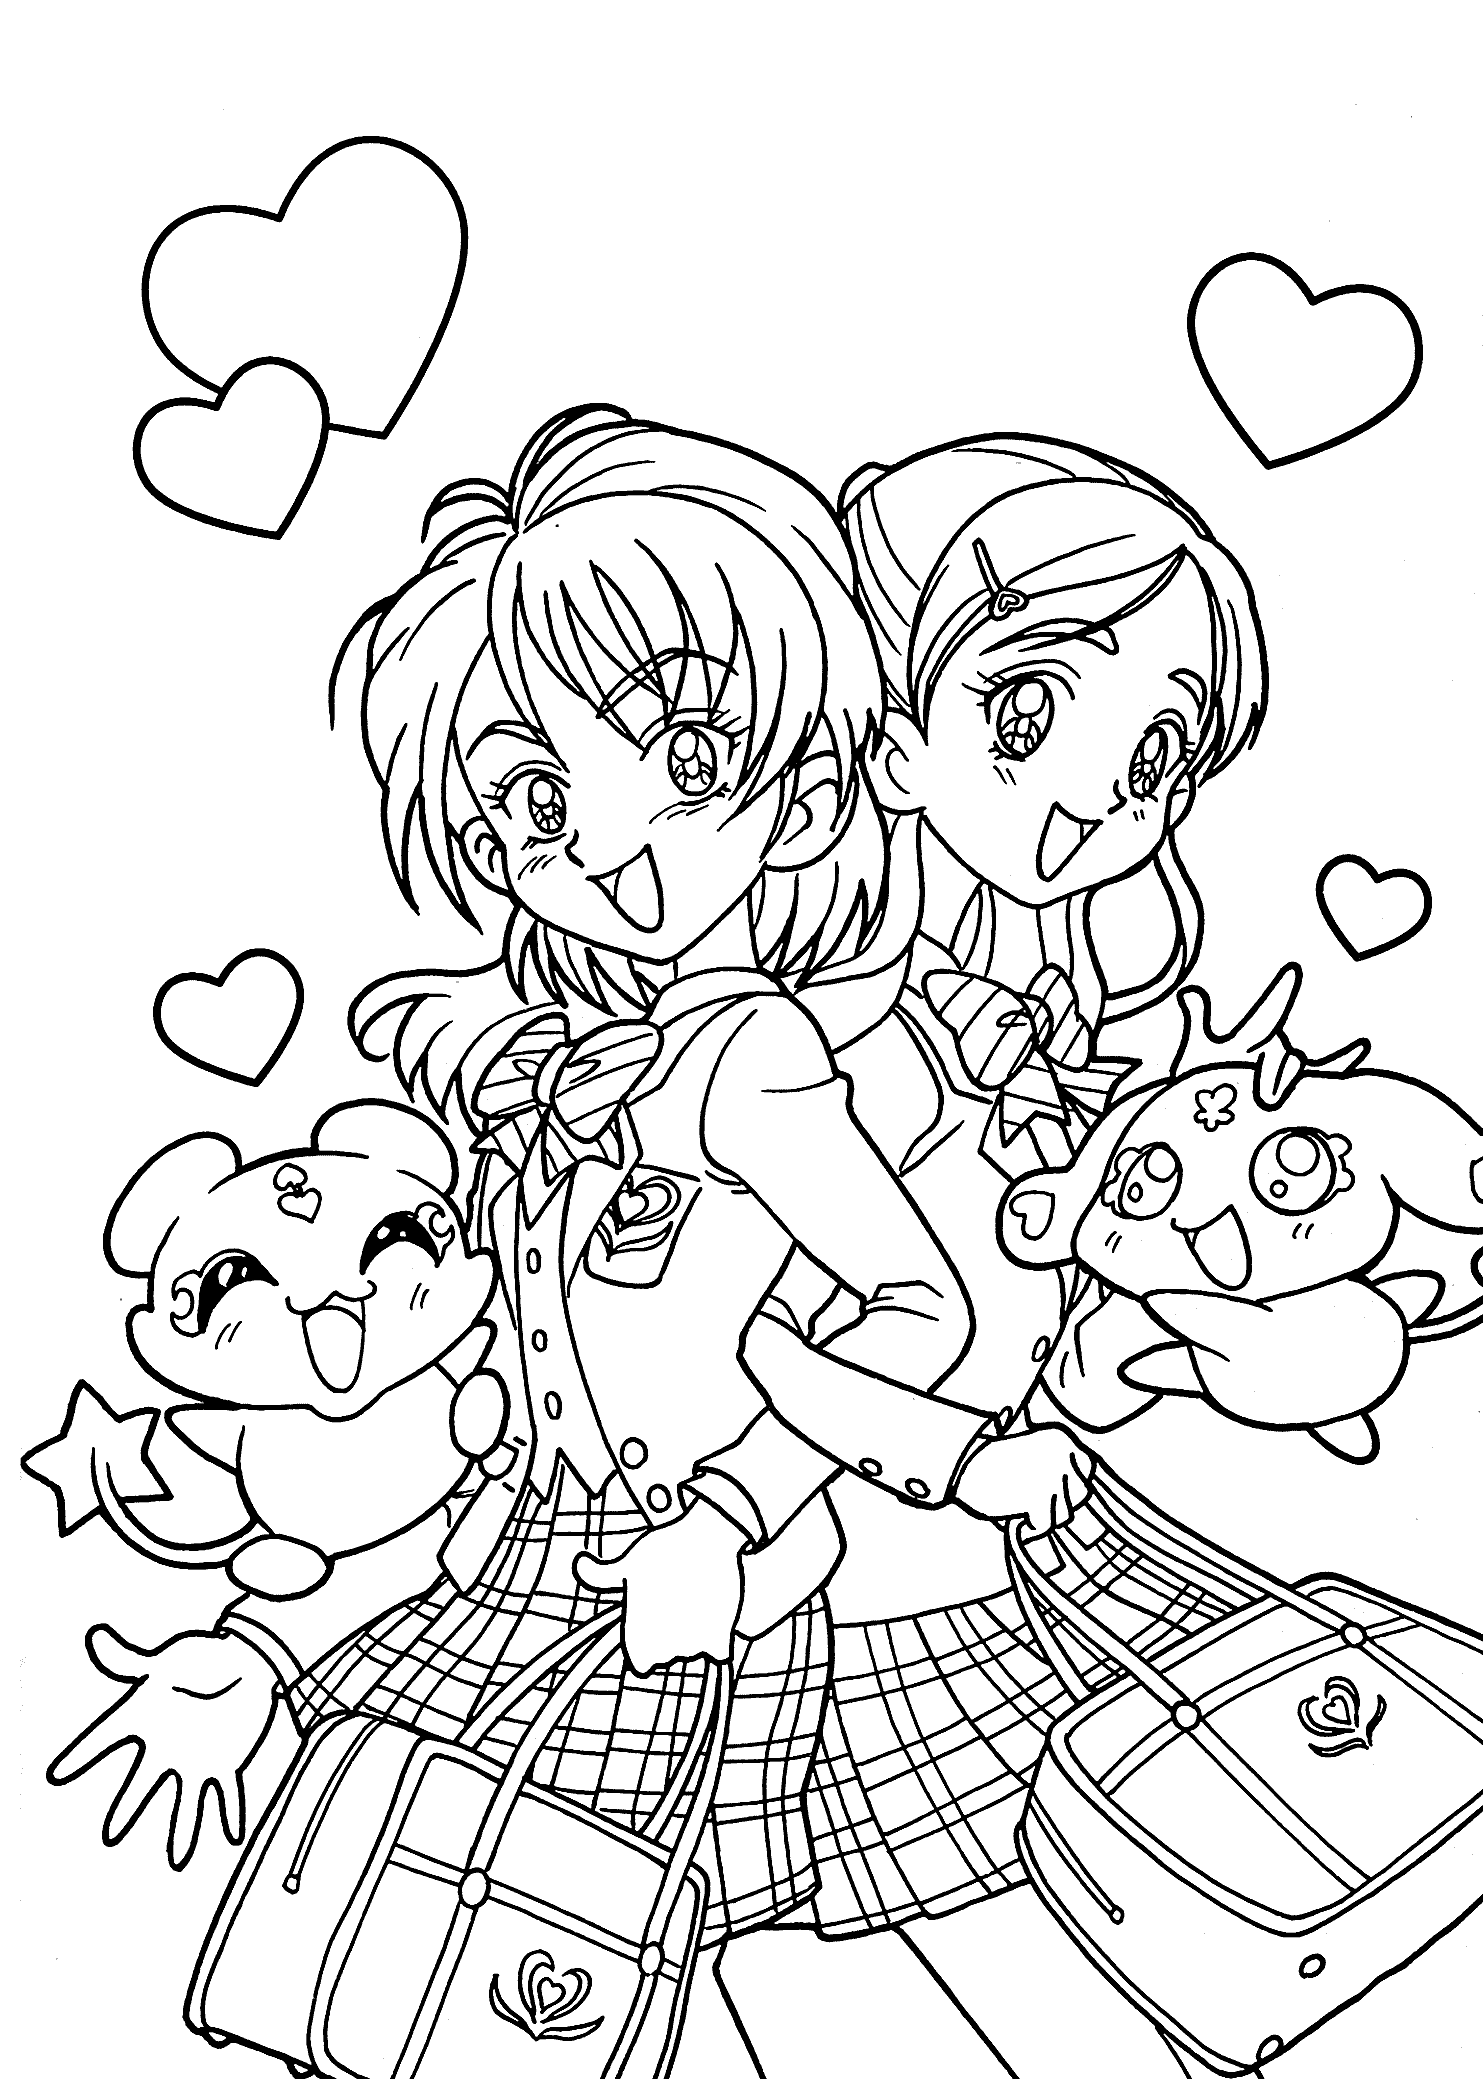 manga girl coloring pages manga coloring pages to download and print for free girl coloring manga pages 